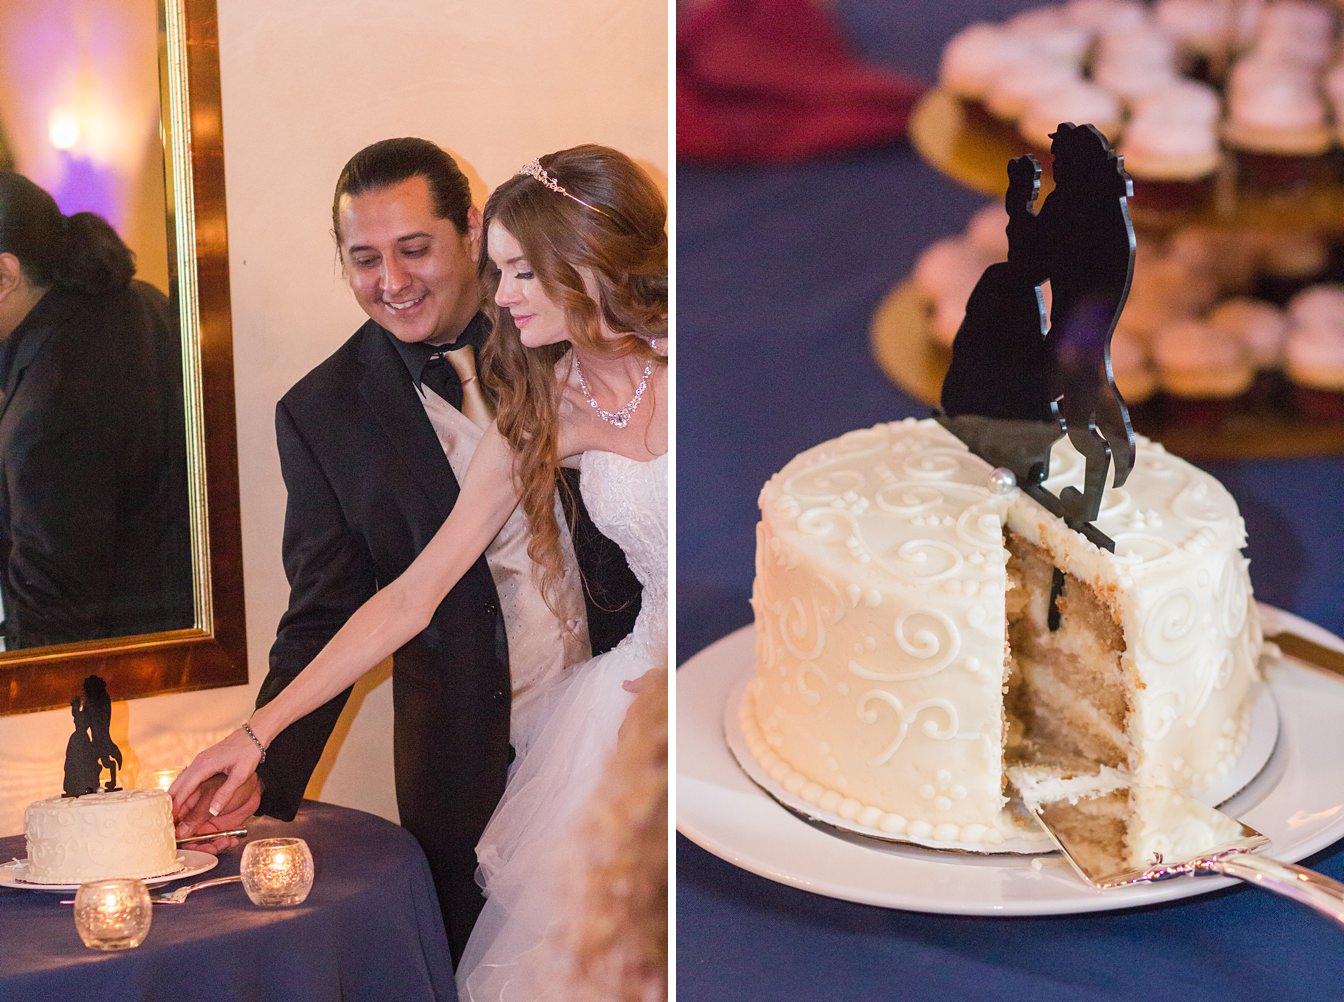 Beauty and the Beast Inspired Catta Verdera Wedding by Adrienne and Dani Photography